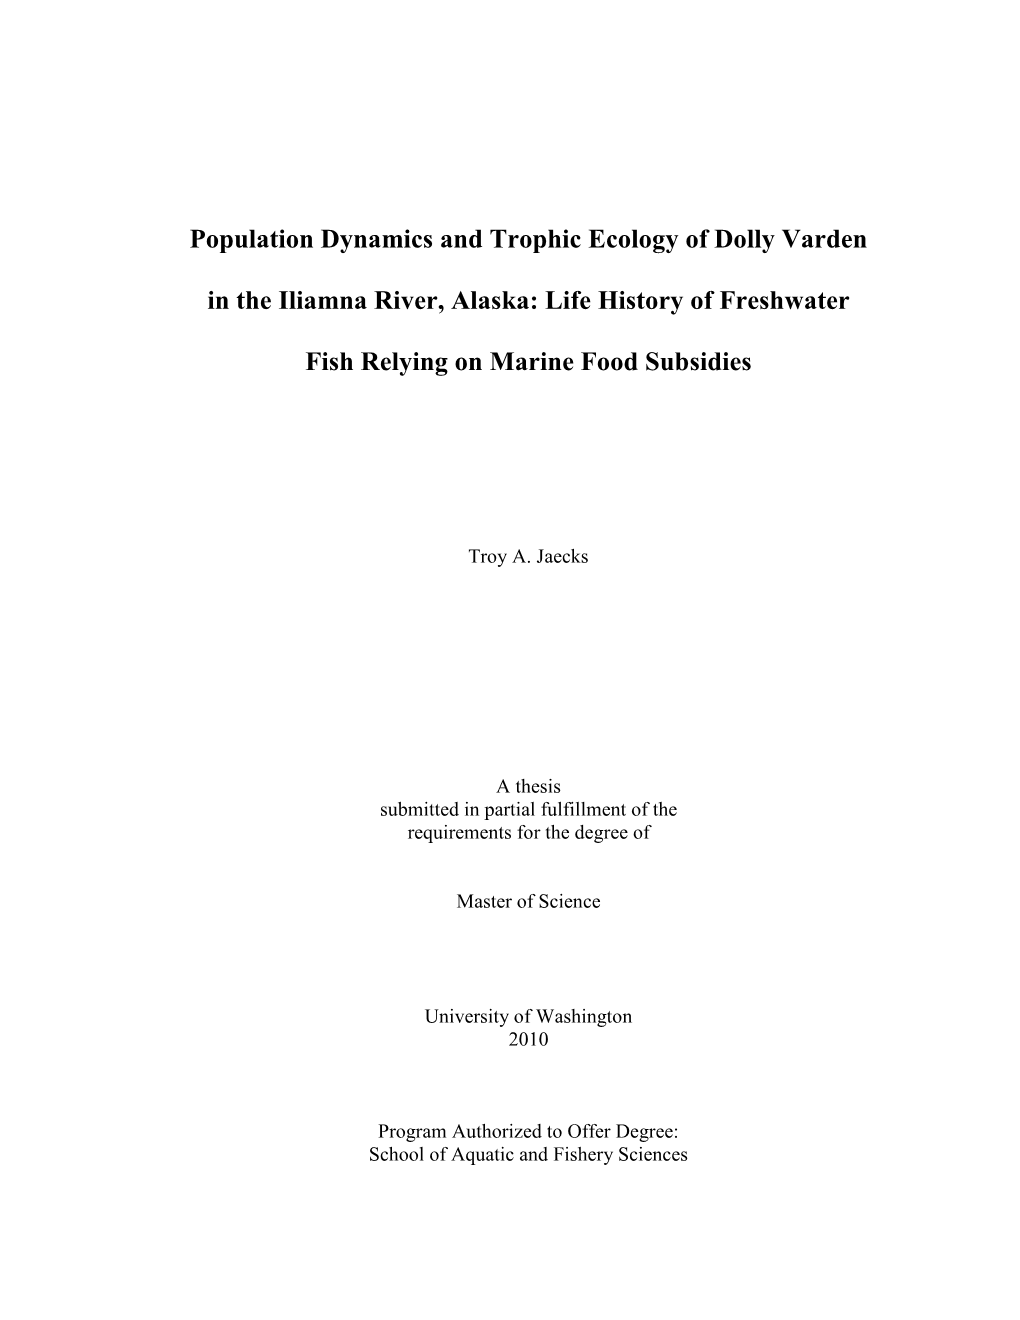 Population Dynamics and Trophic Ecology of Dolly Varden in The